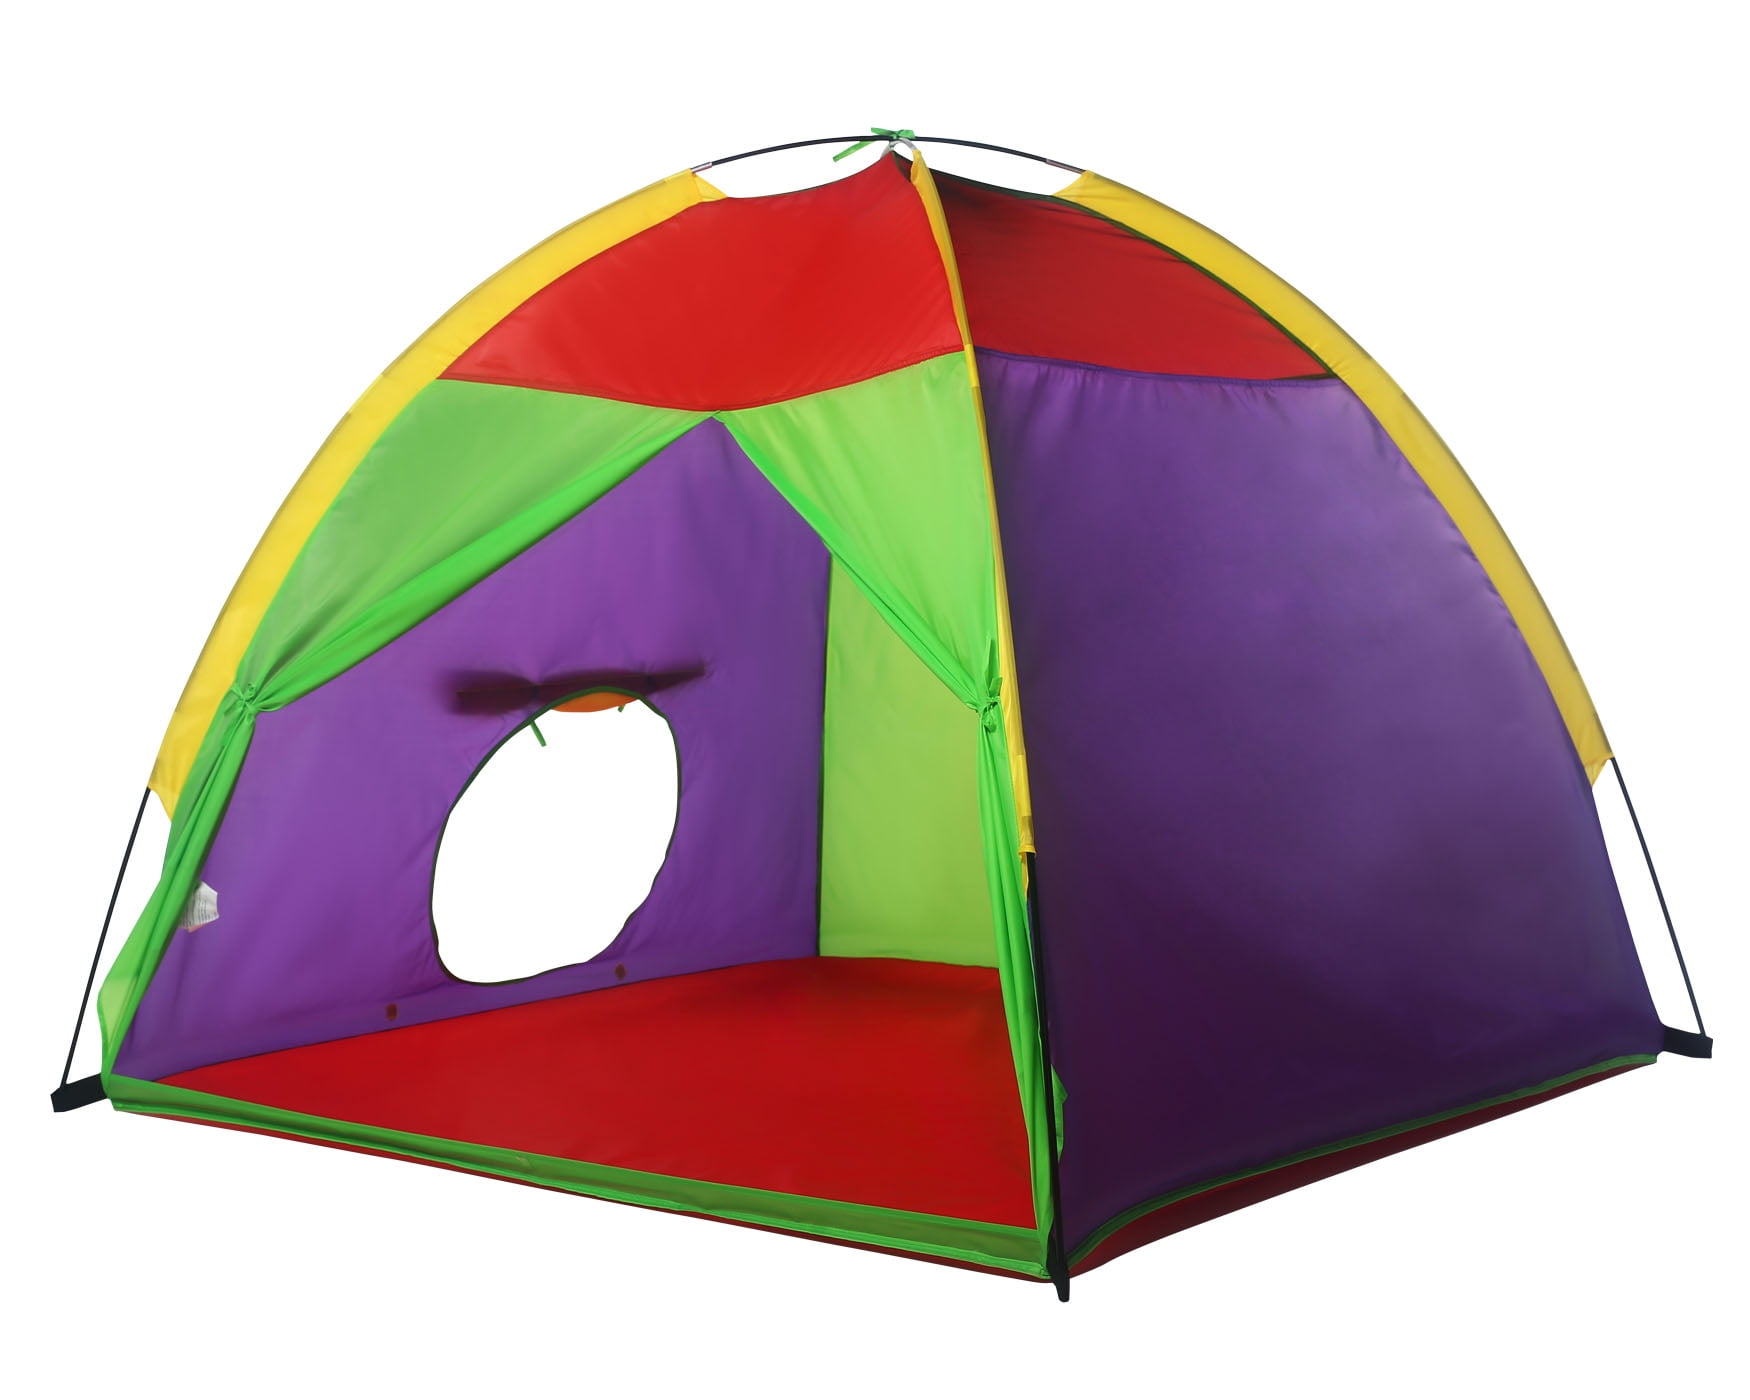 Tri-Colored Tent Indoor Play House for Boys & Girls 43"L x 41''W x 55"H 